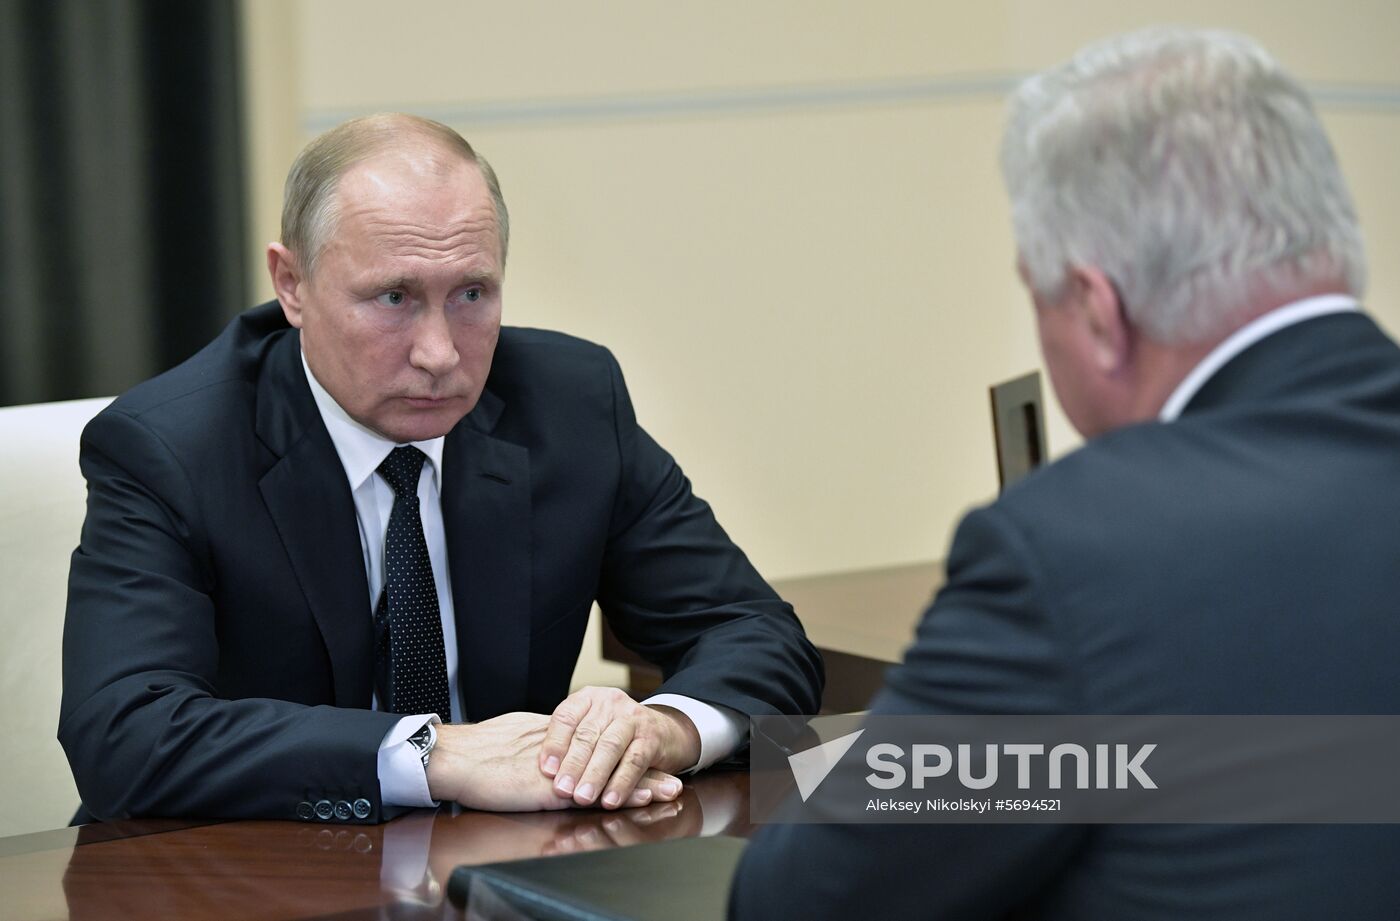 Presdient Putin holds working meeting with FITU head Shmakov